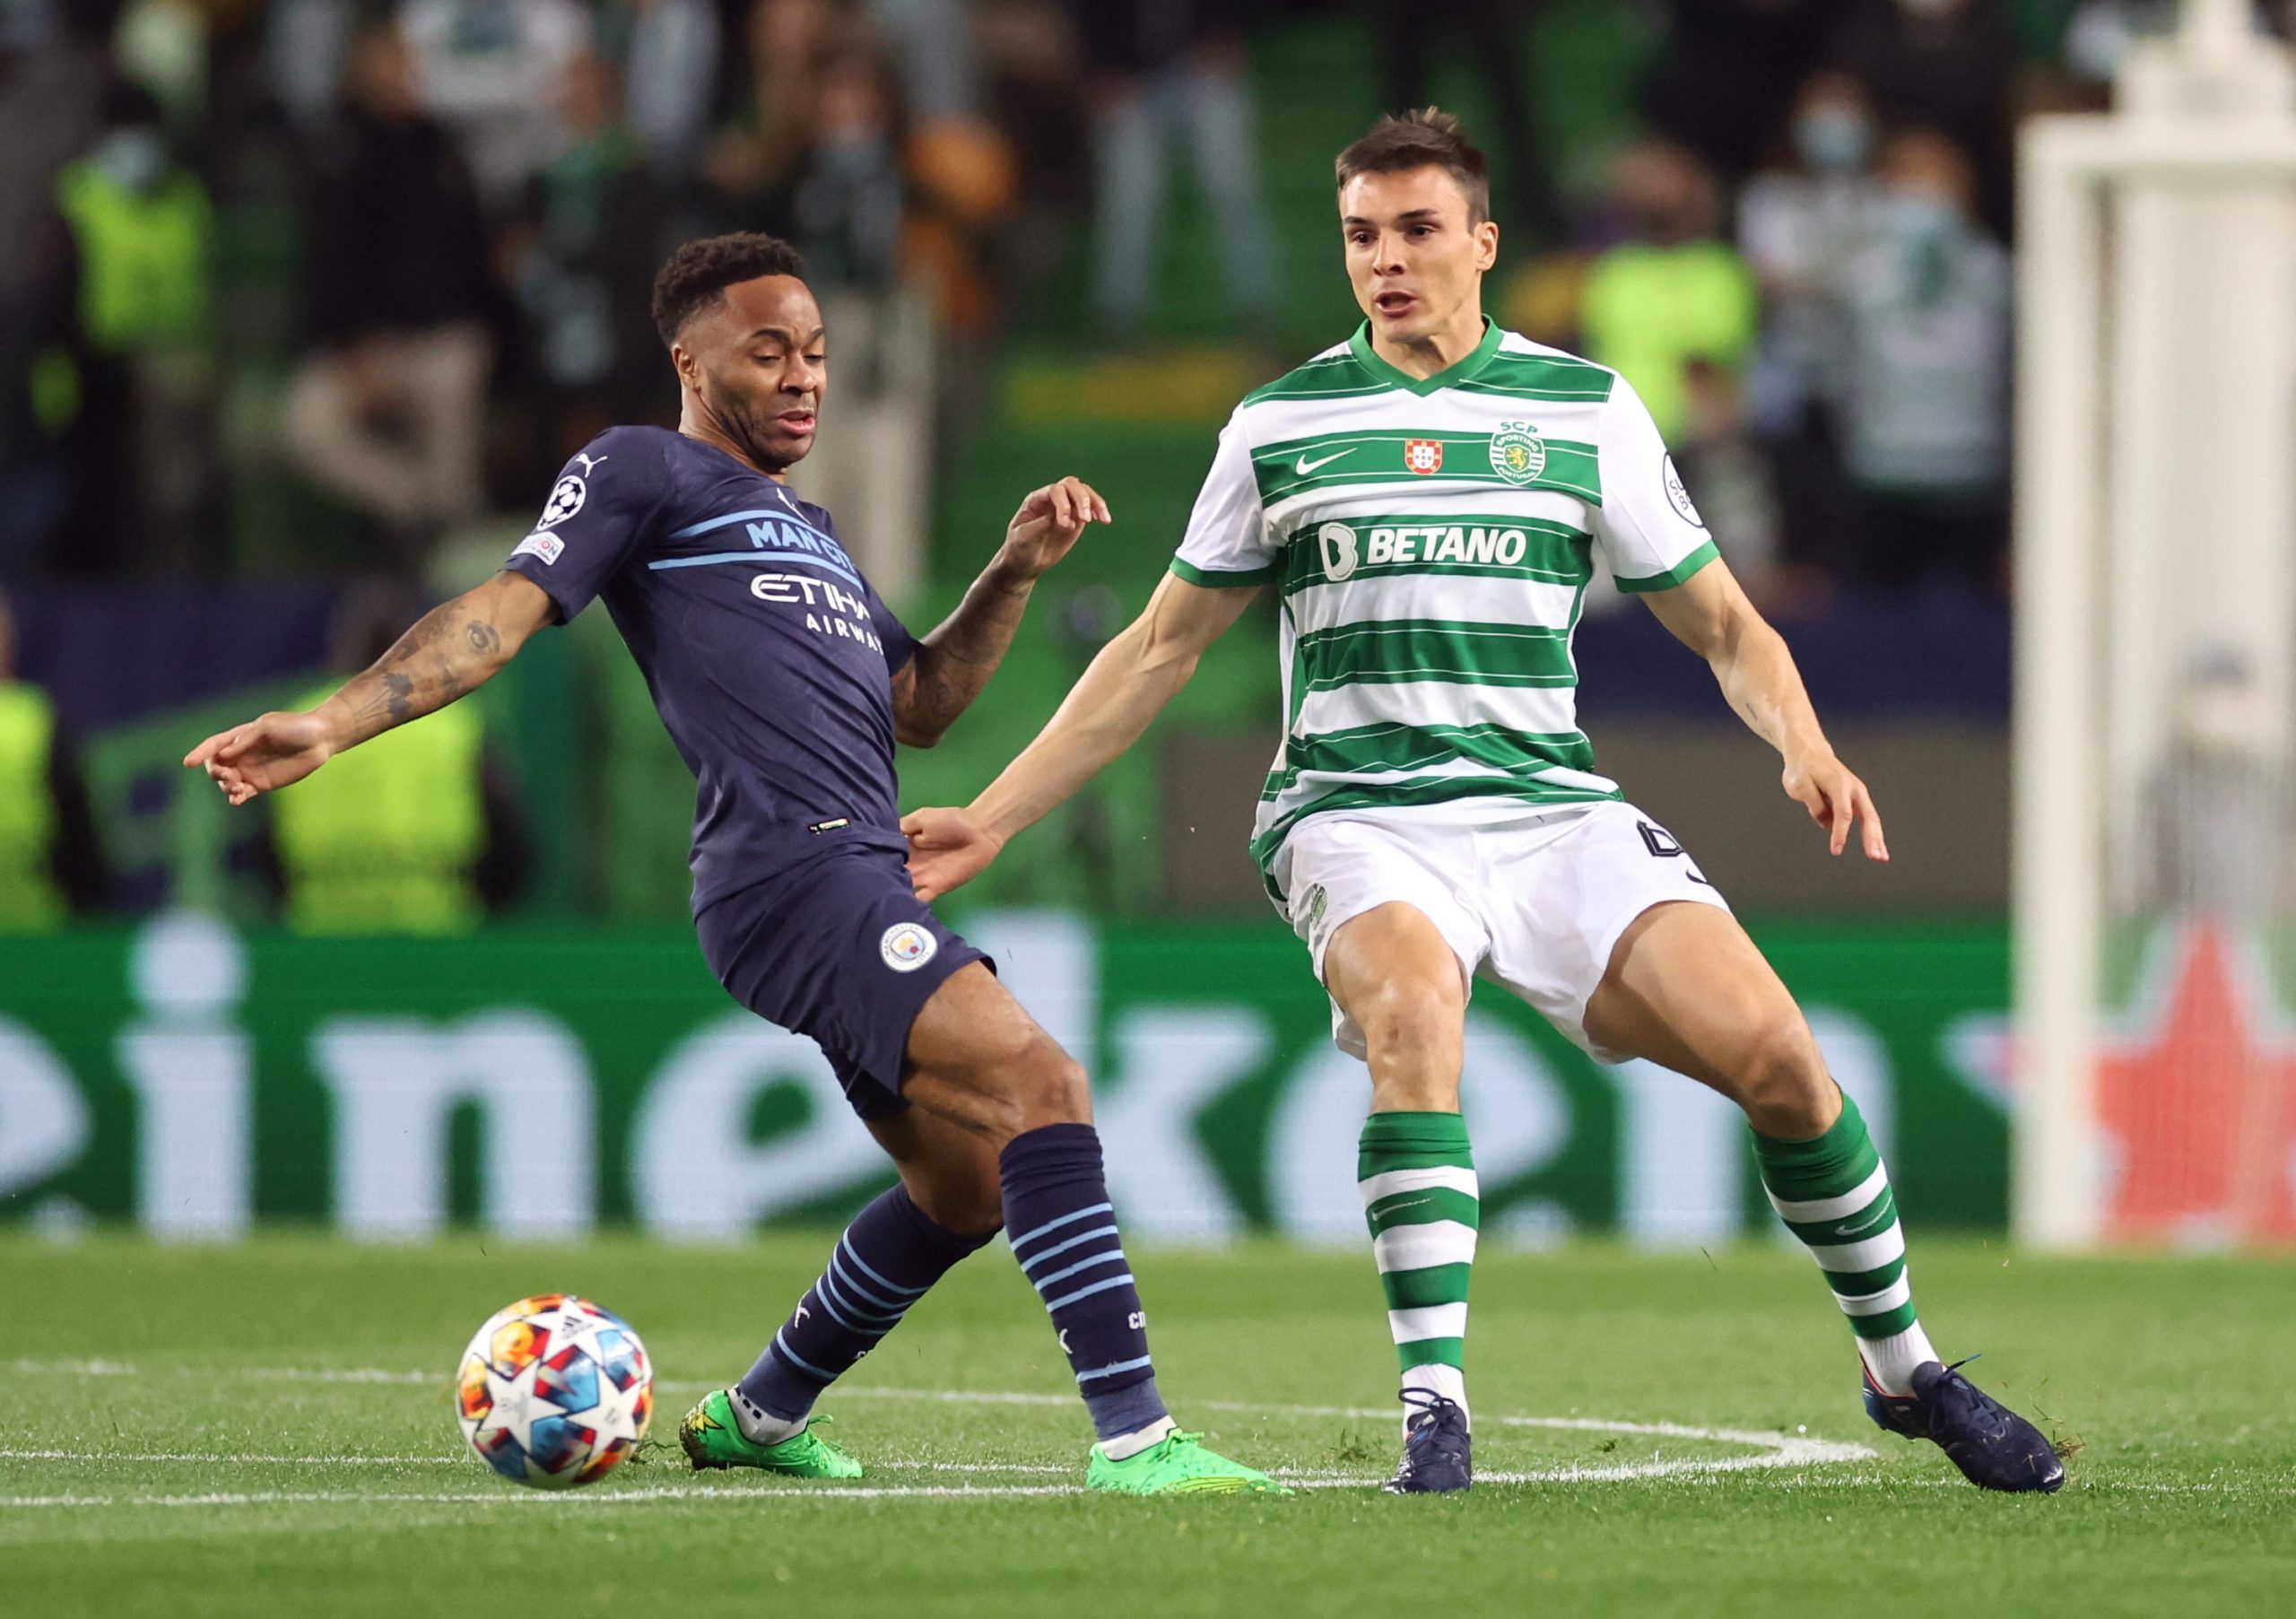 Soccer Football - Champions League - Round of 16 First Leg - Sporting CP v Manchester City - Estadio Jose Alvalade, Lisbon, Portugal - February 15, 2022 Manchester City's Raheem Sterling in action with Sporting CP's Joao Palhinha Action Images via Reuters/Carl Recine